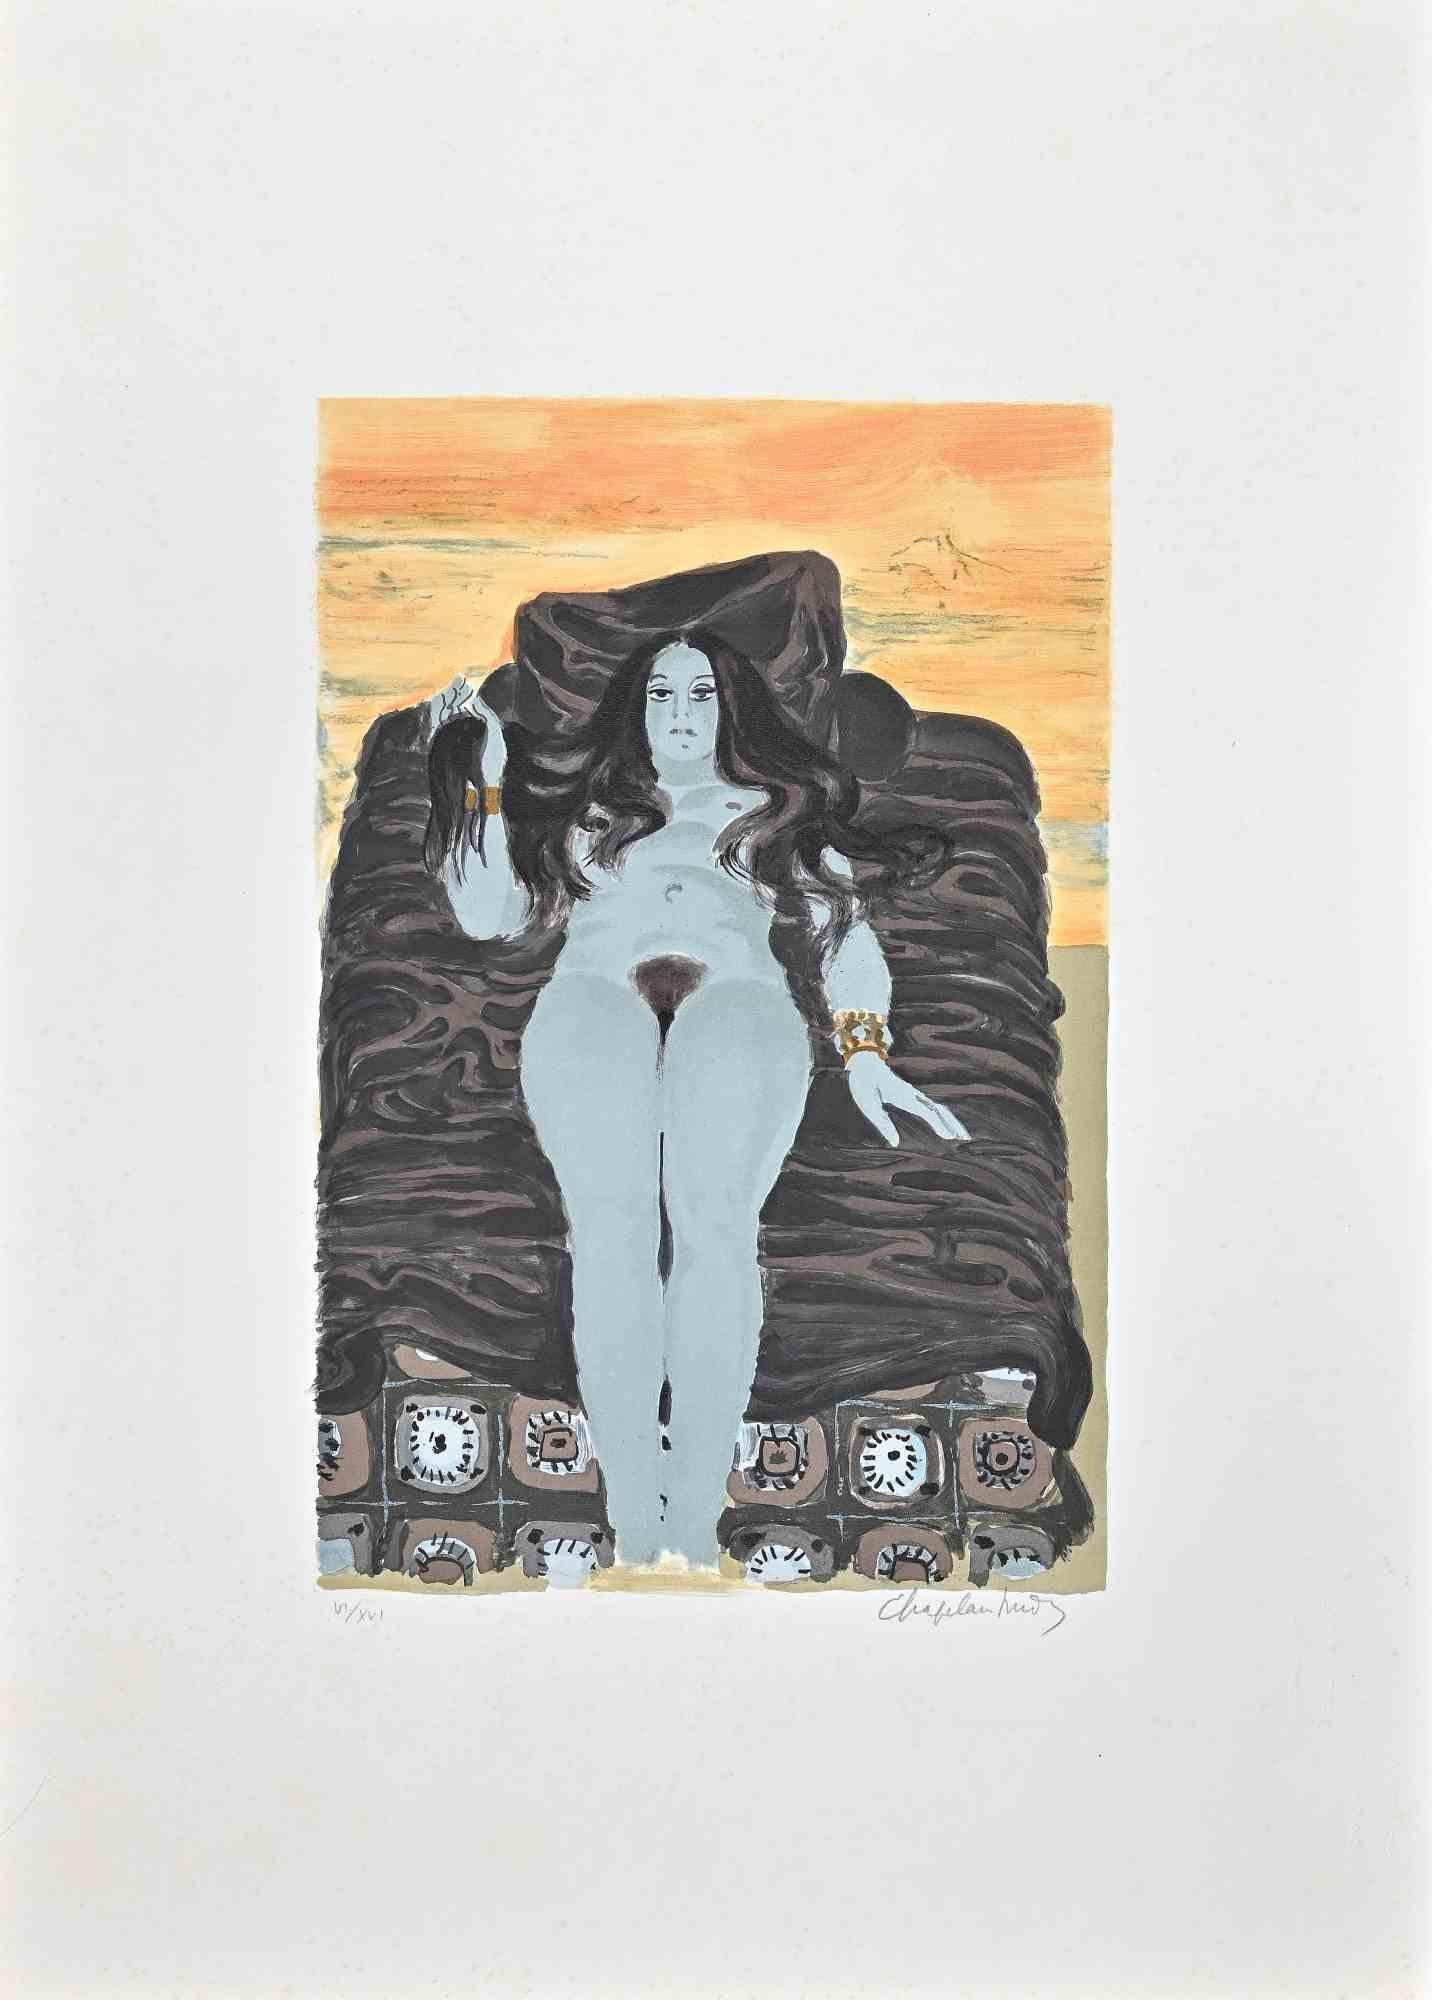 The Rest  is an original colored lithograph realized by the artist Roger Chapelain-Midy in the 1970s.

Hand-signed by the artist on the lower right. Numbered on the lower left. Edition VI/XVI.

The artwork represents a nude woman lying down while